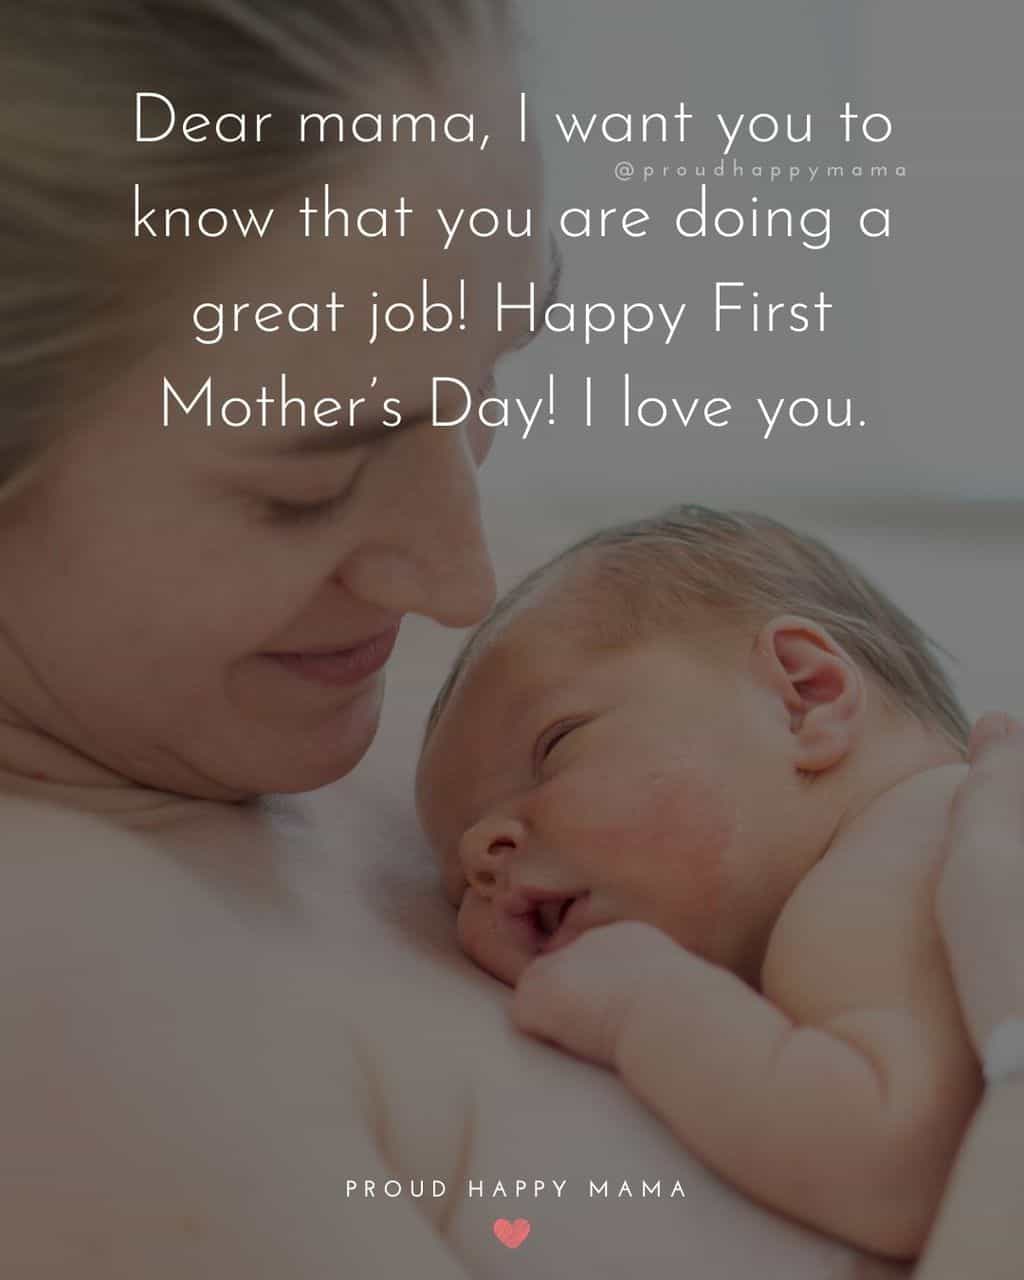 First Mothers Day Quotes - Dear mama, I want you to know that you are doing a great job! Happy First Mother’s Day! I love you.’